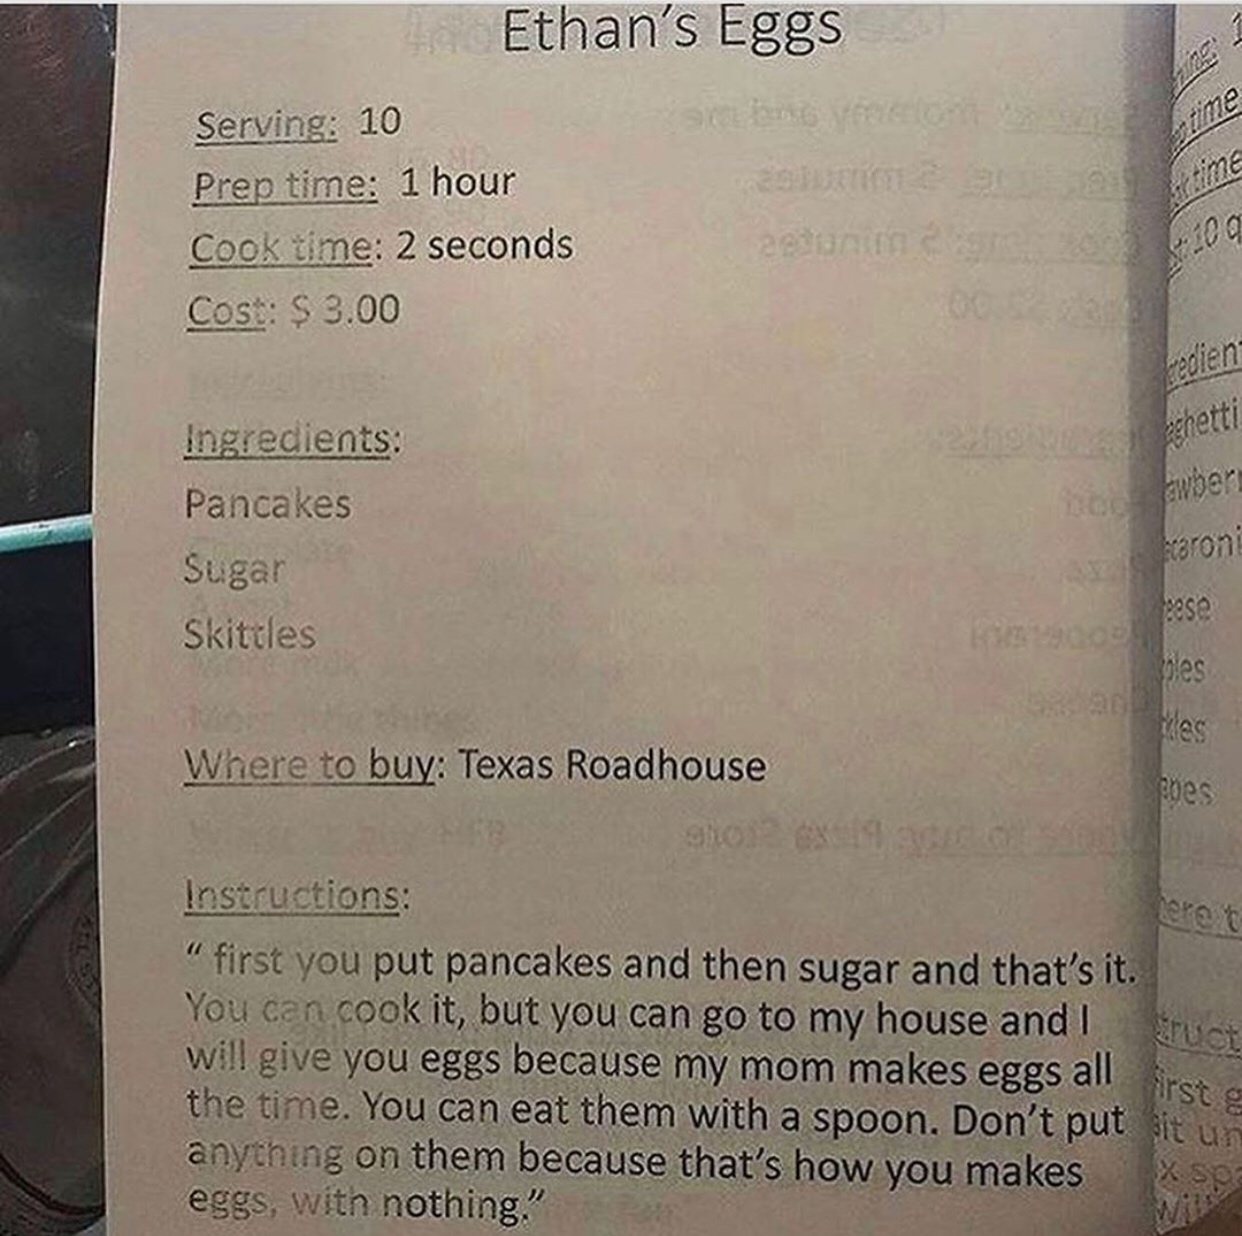 document - Ethan's Eggs Serving 10 Prep time 1 hour Cook time 2 seconds Cost $3.00 Bezani 6200 00 redien V aghetti Ingredients Pancakes Sugar Skittles baroni Where to buy Texas Roadhouse enes Instructions first you put pancakes and then sugar and that's i